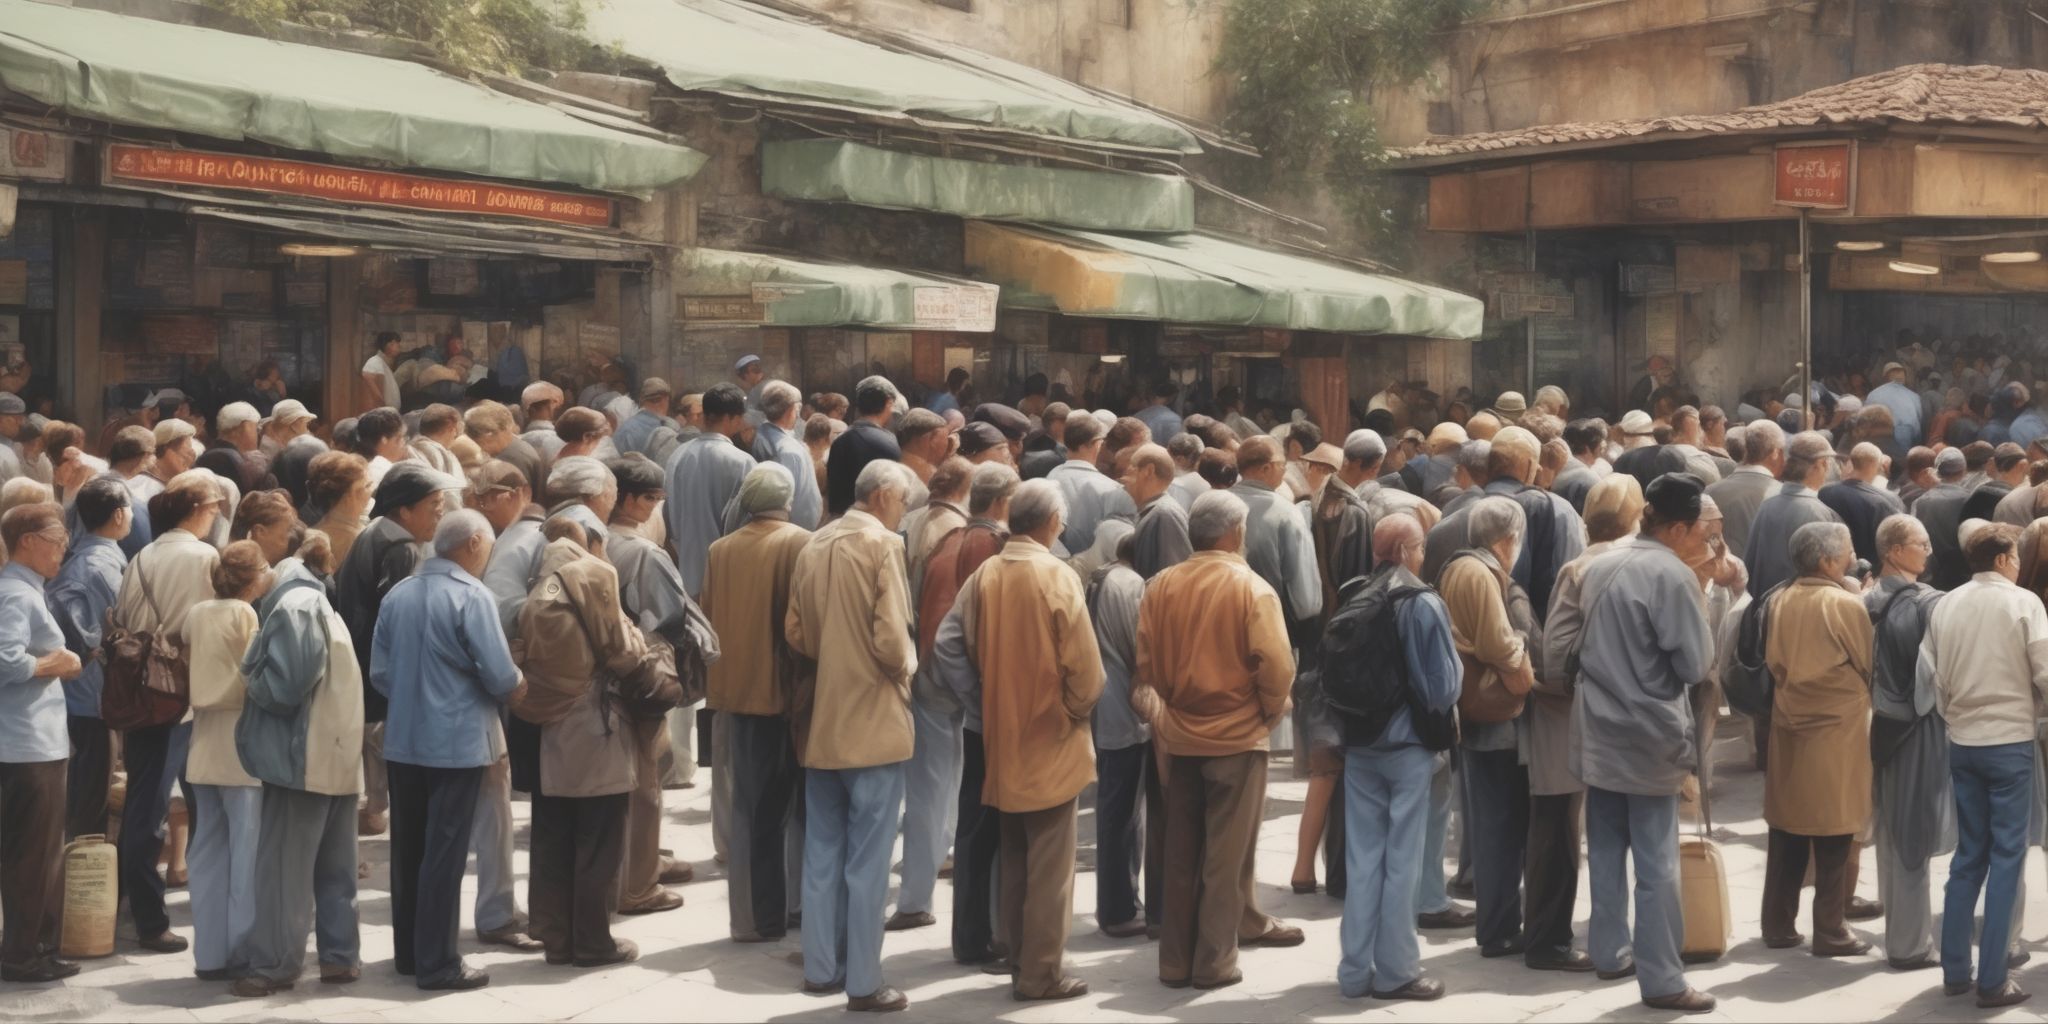 Queue  in realistic, photographic style